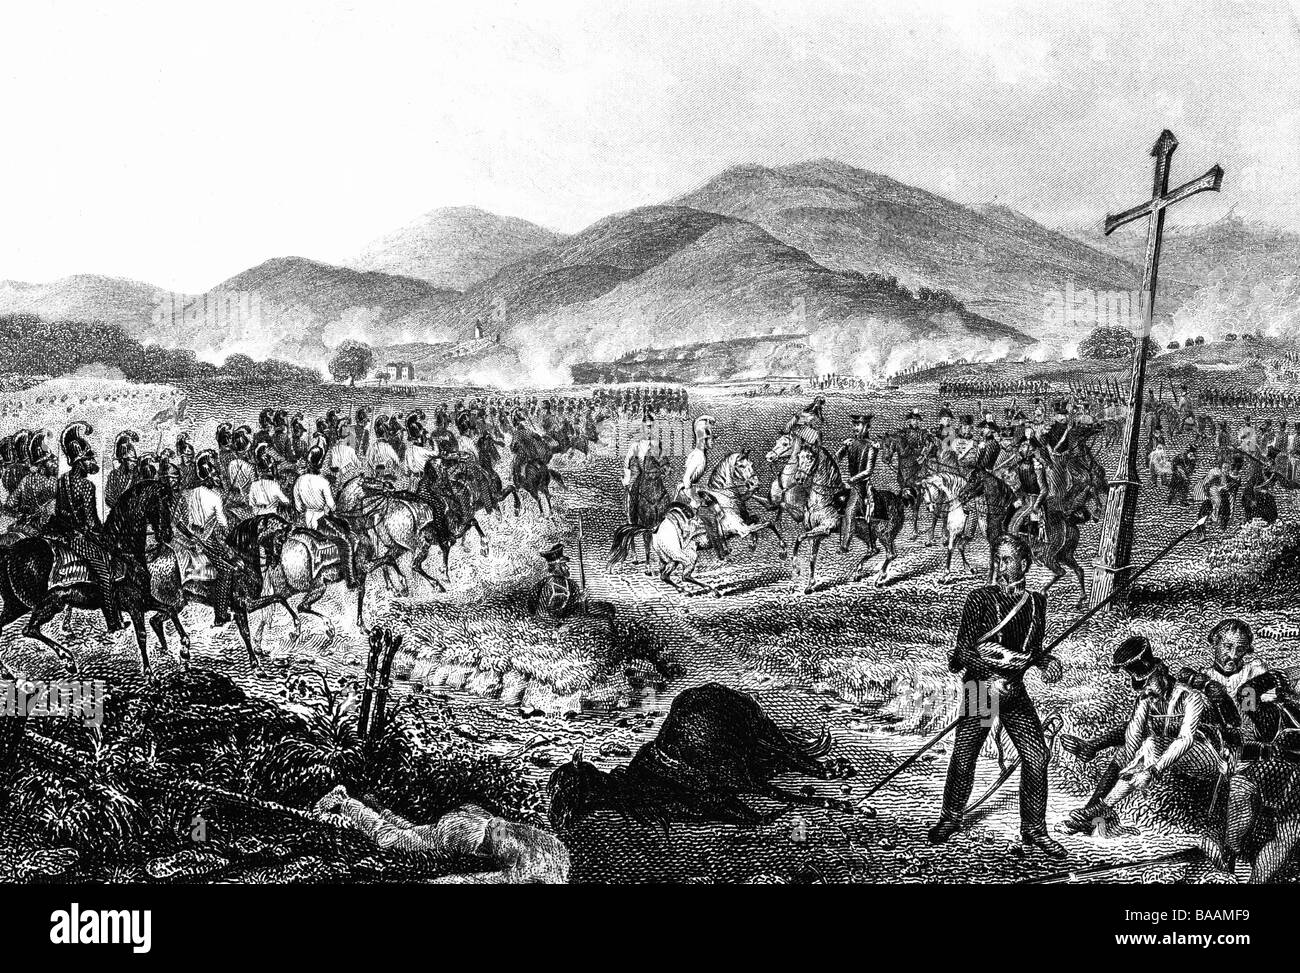 events, War of the Sixth Coalition 1812 - 1814, Battle of Kulm 29.- 30.8.1813, general Friedrich Emil von Kleist and his staff, steel wood engraving, 19th century, Napoleonic Wars, Austria, Czechia, Bohemia, Chlumec, allied, Austrian, Russian, Prussian, cavalry, historic, historical, people, Stock Photo